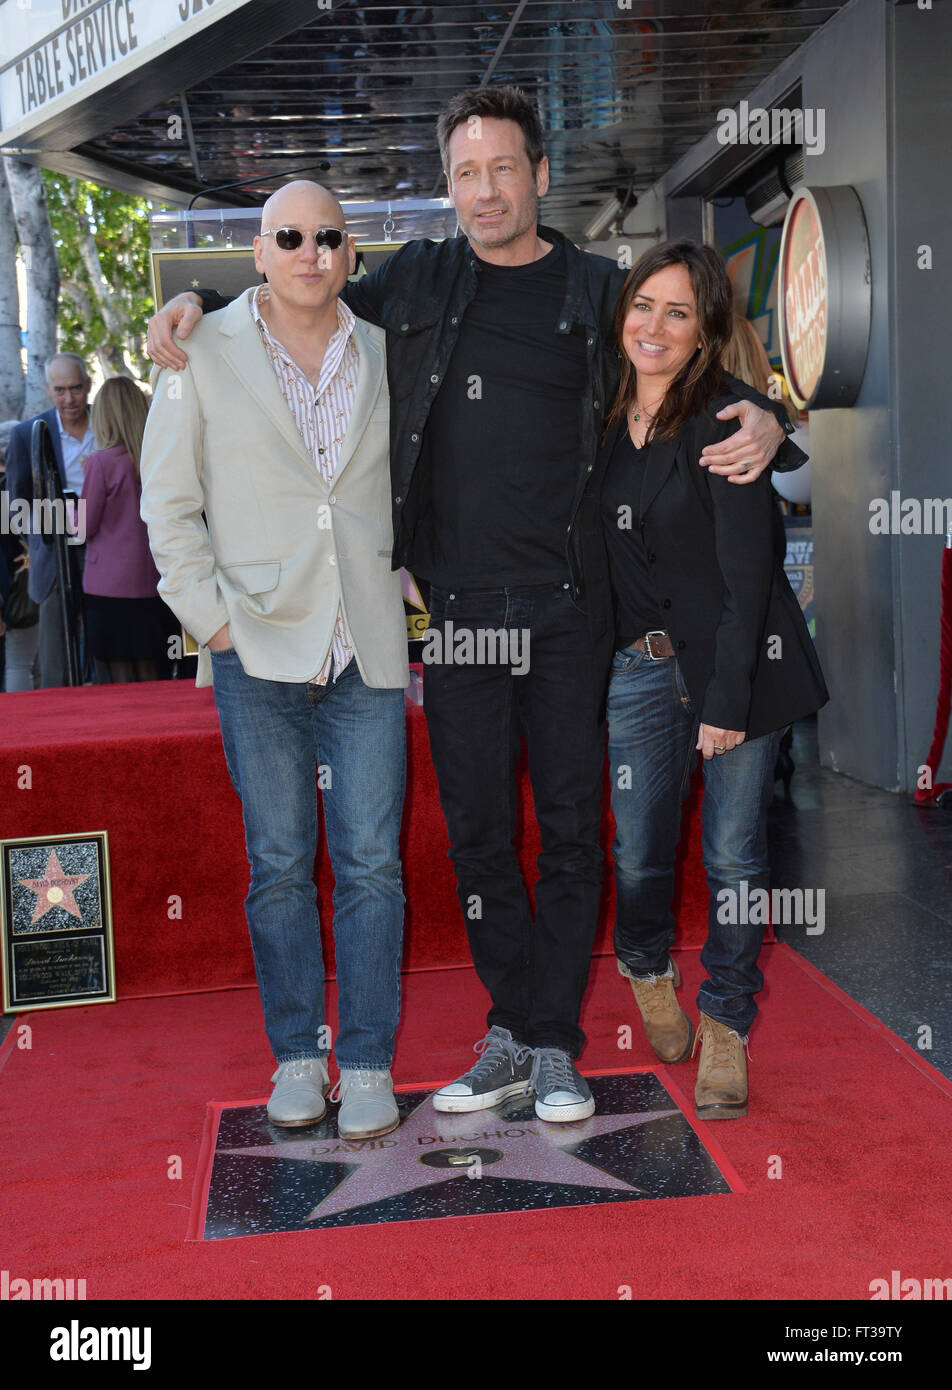 LOS ANGELES, CA - JANUARY 25, 2016: Actor David Duchovny & Californication co-stars Evan Handler & Pamela Adlon on Hollywood Boulevard where he was honored with the 2,572nd star on the Hollywood Walk of Fame. Stock Photo